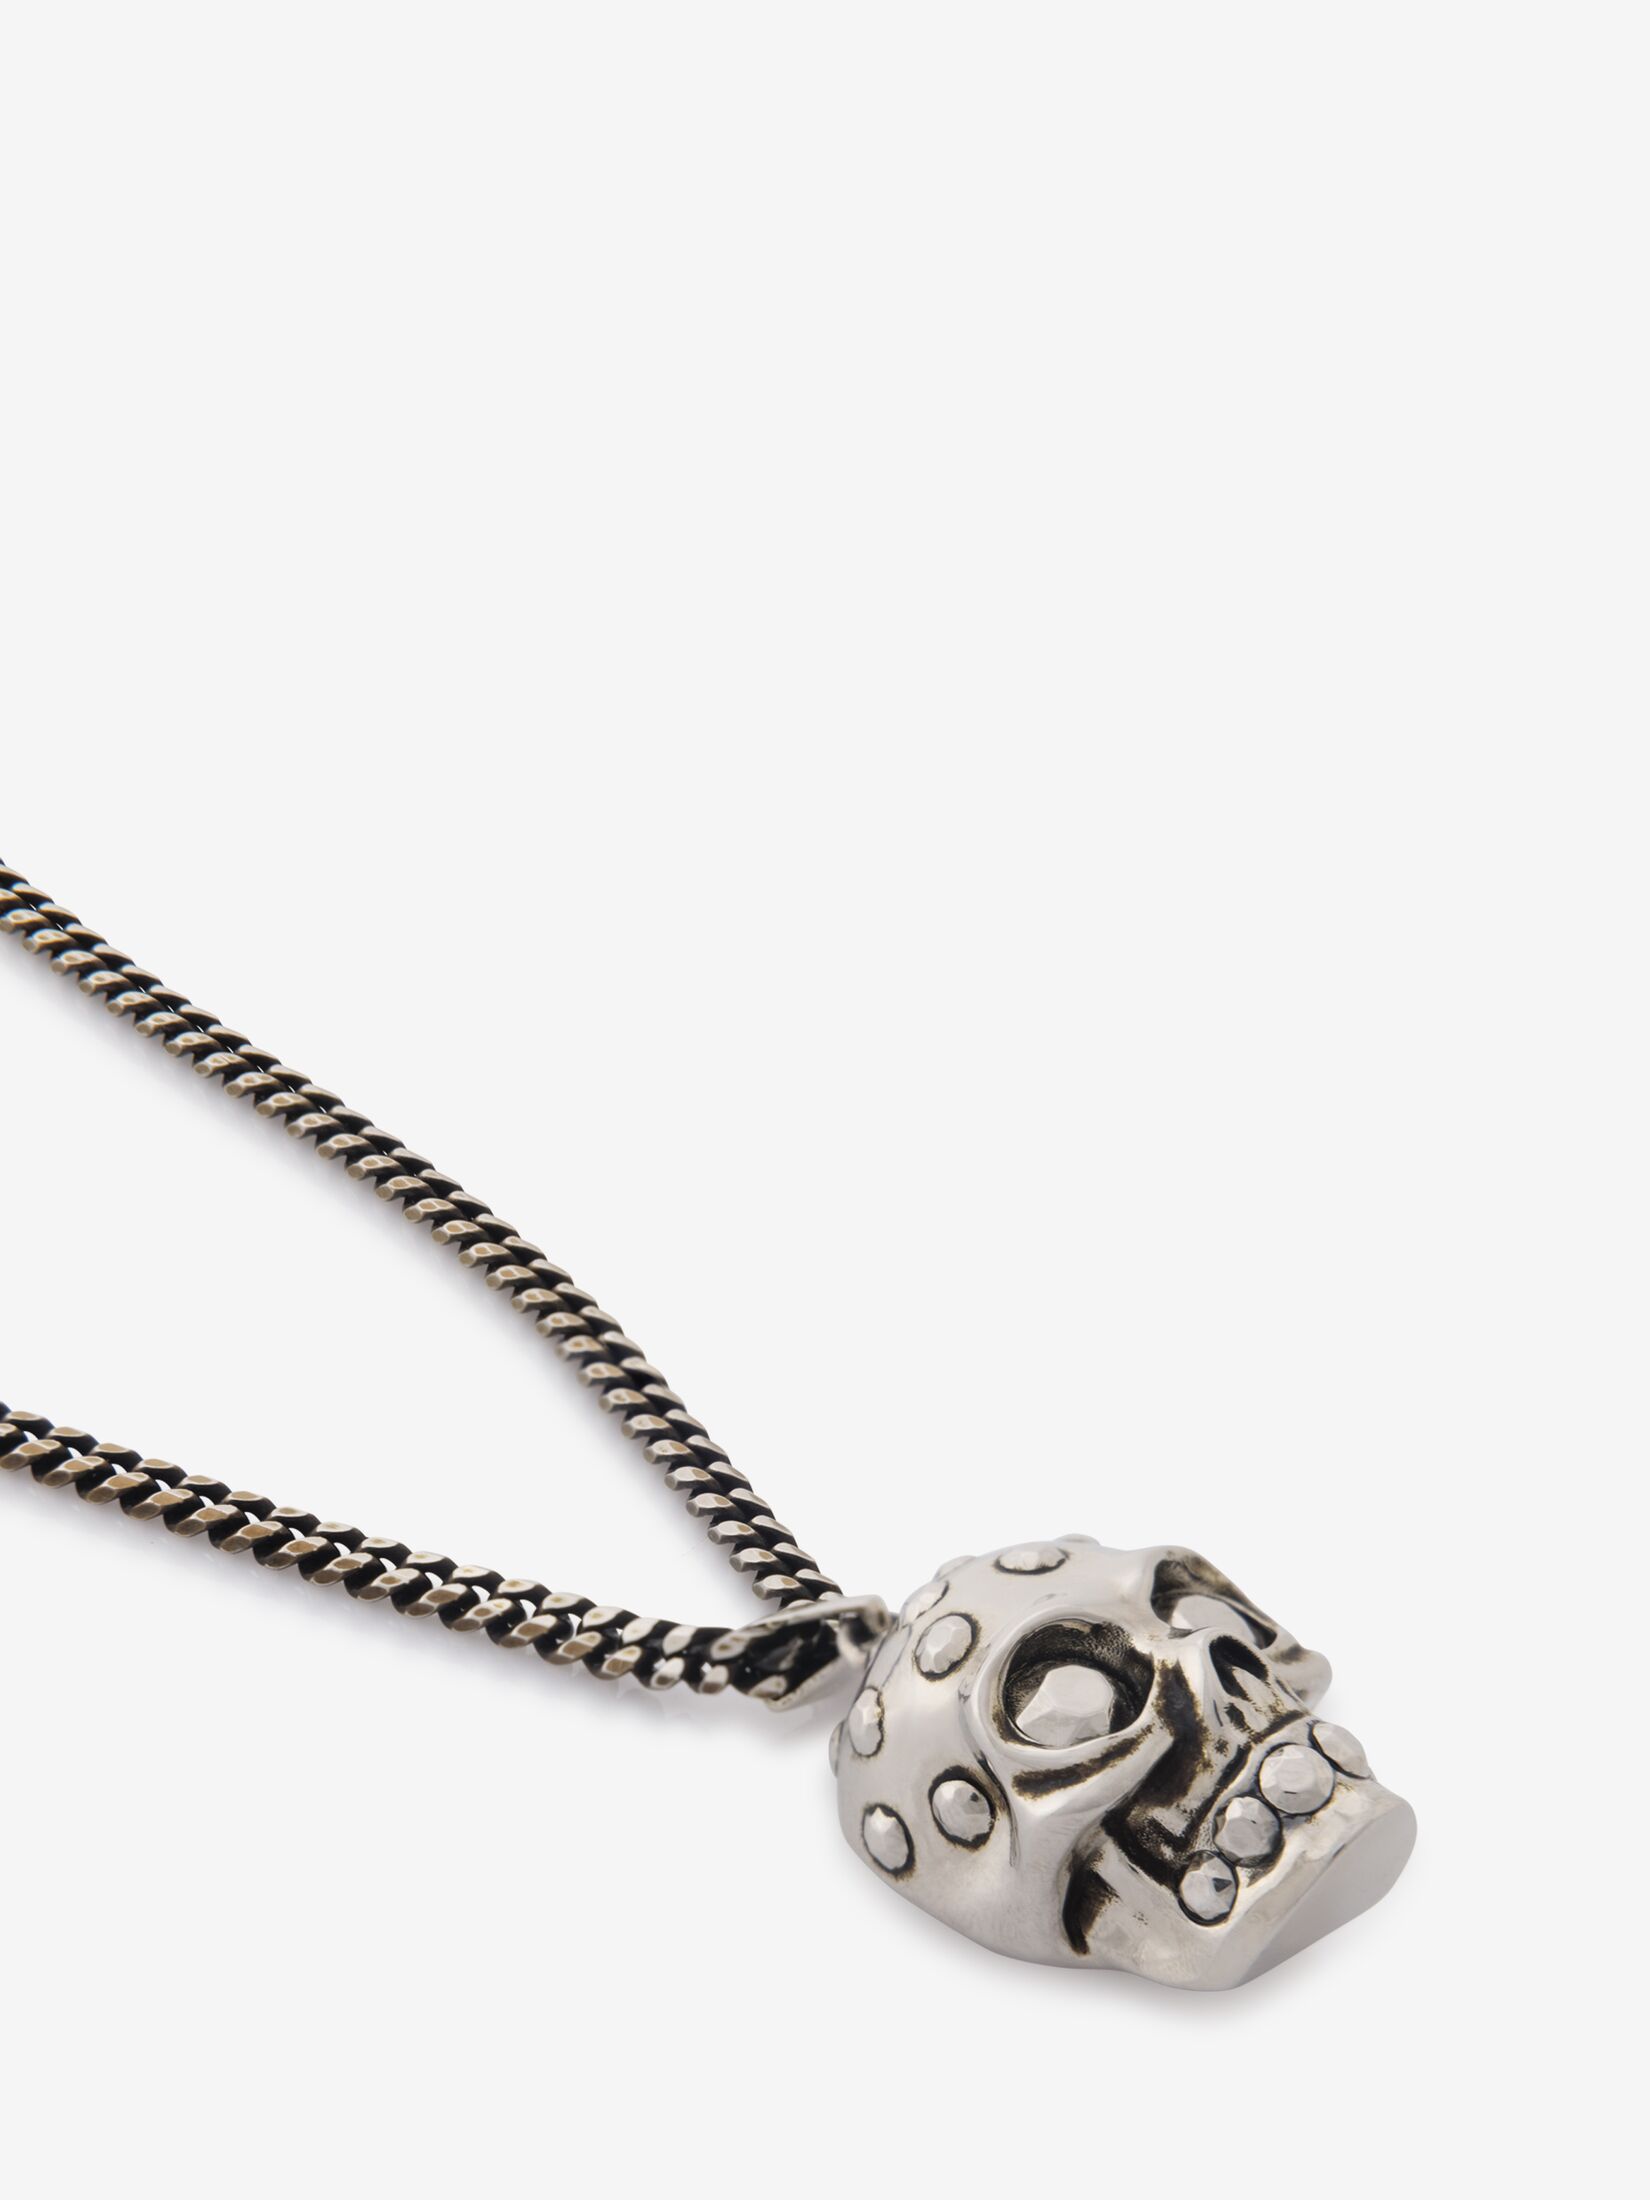 The Knuckle Skull Necklace